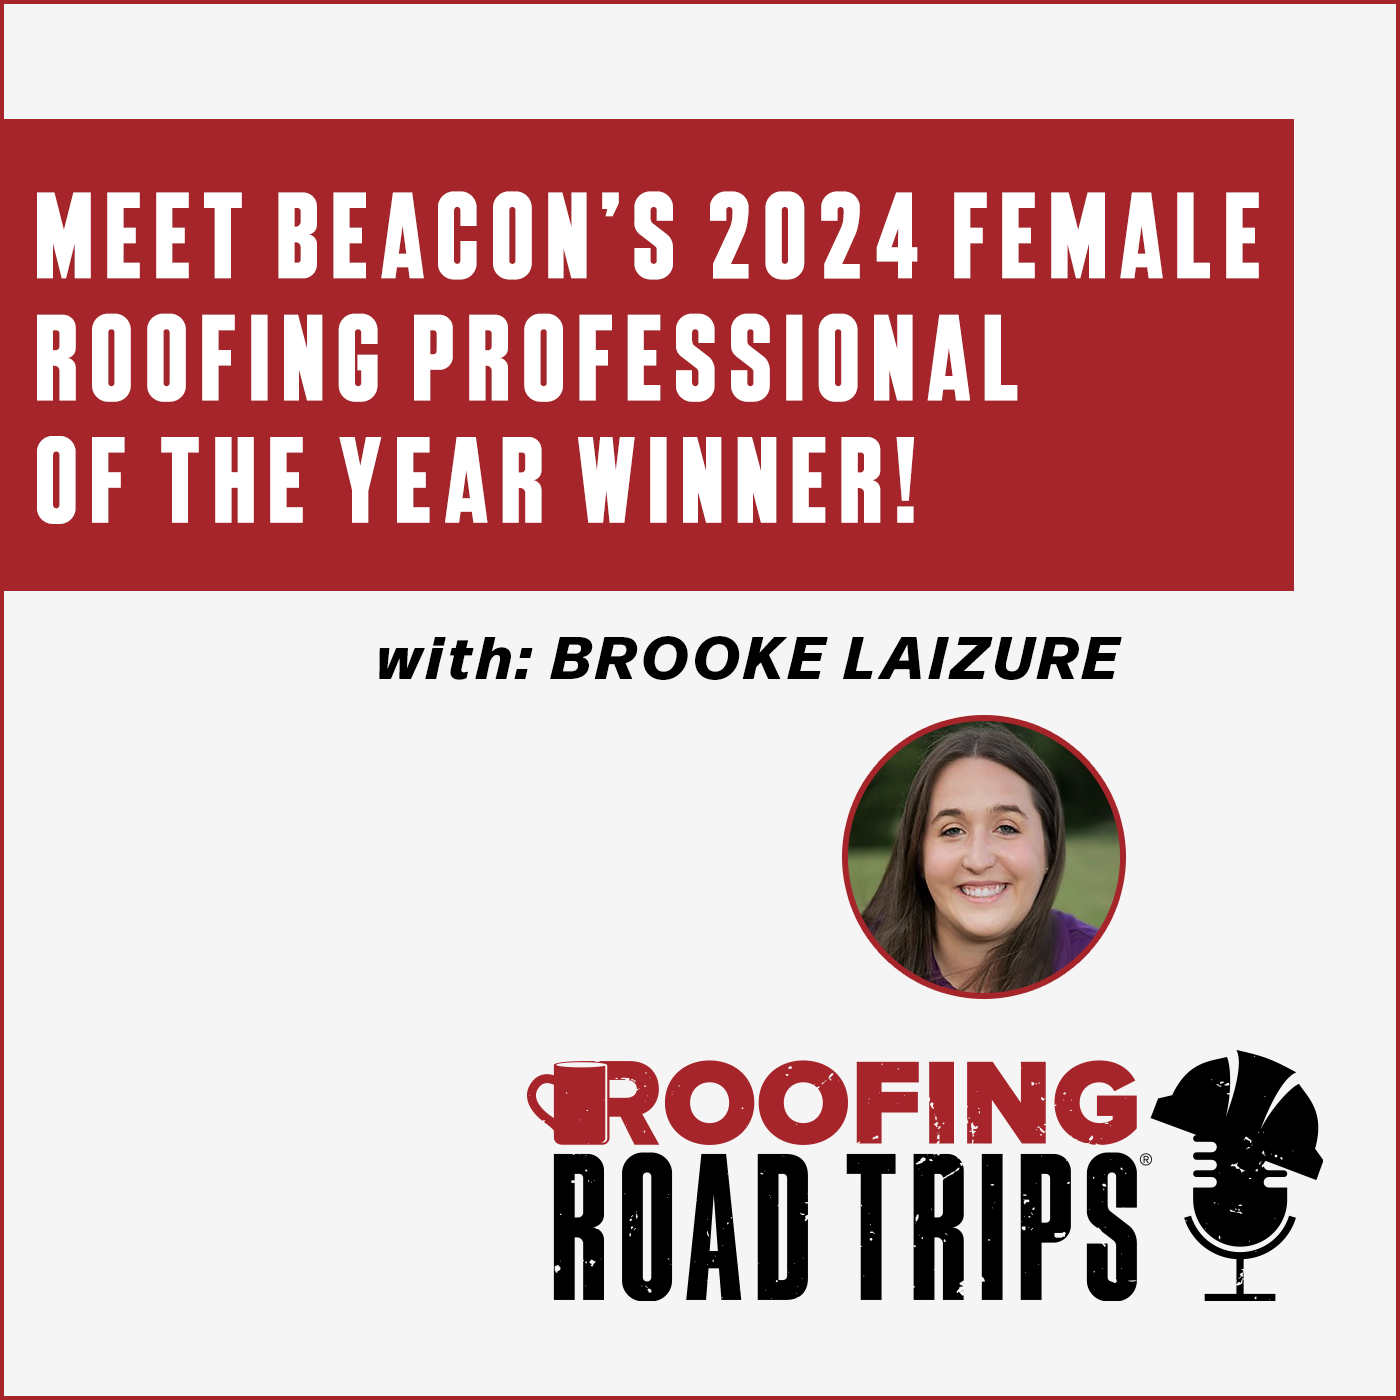 Brooke Laizure - Meet Beacon’s 2024 Female Roofing Professional of the Year!